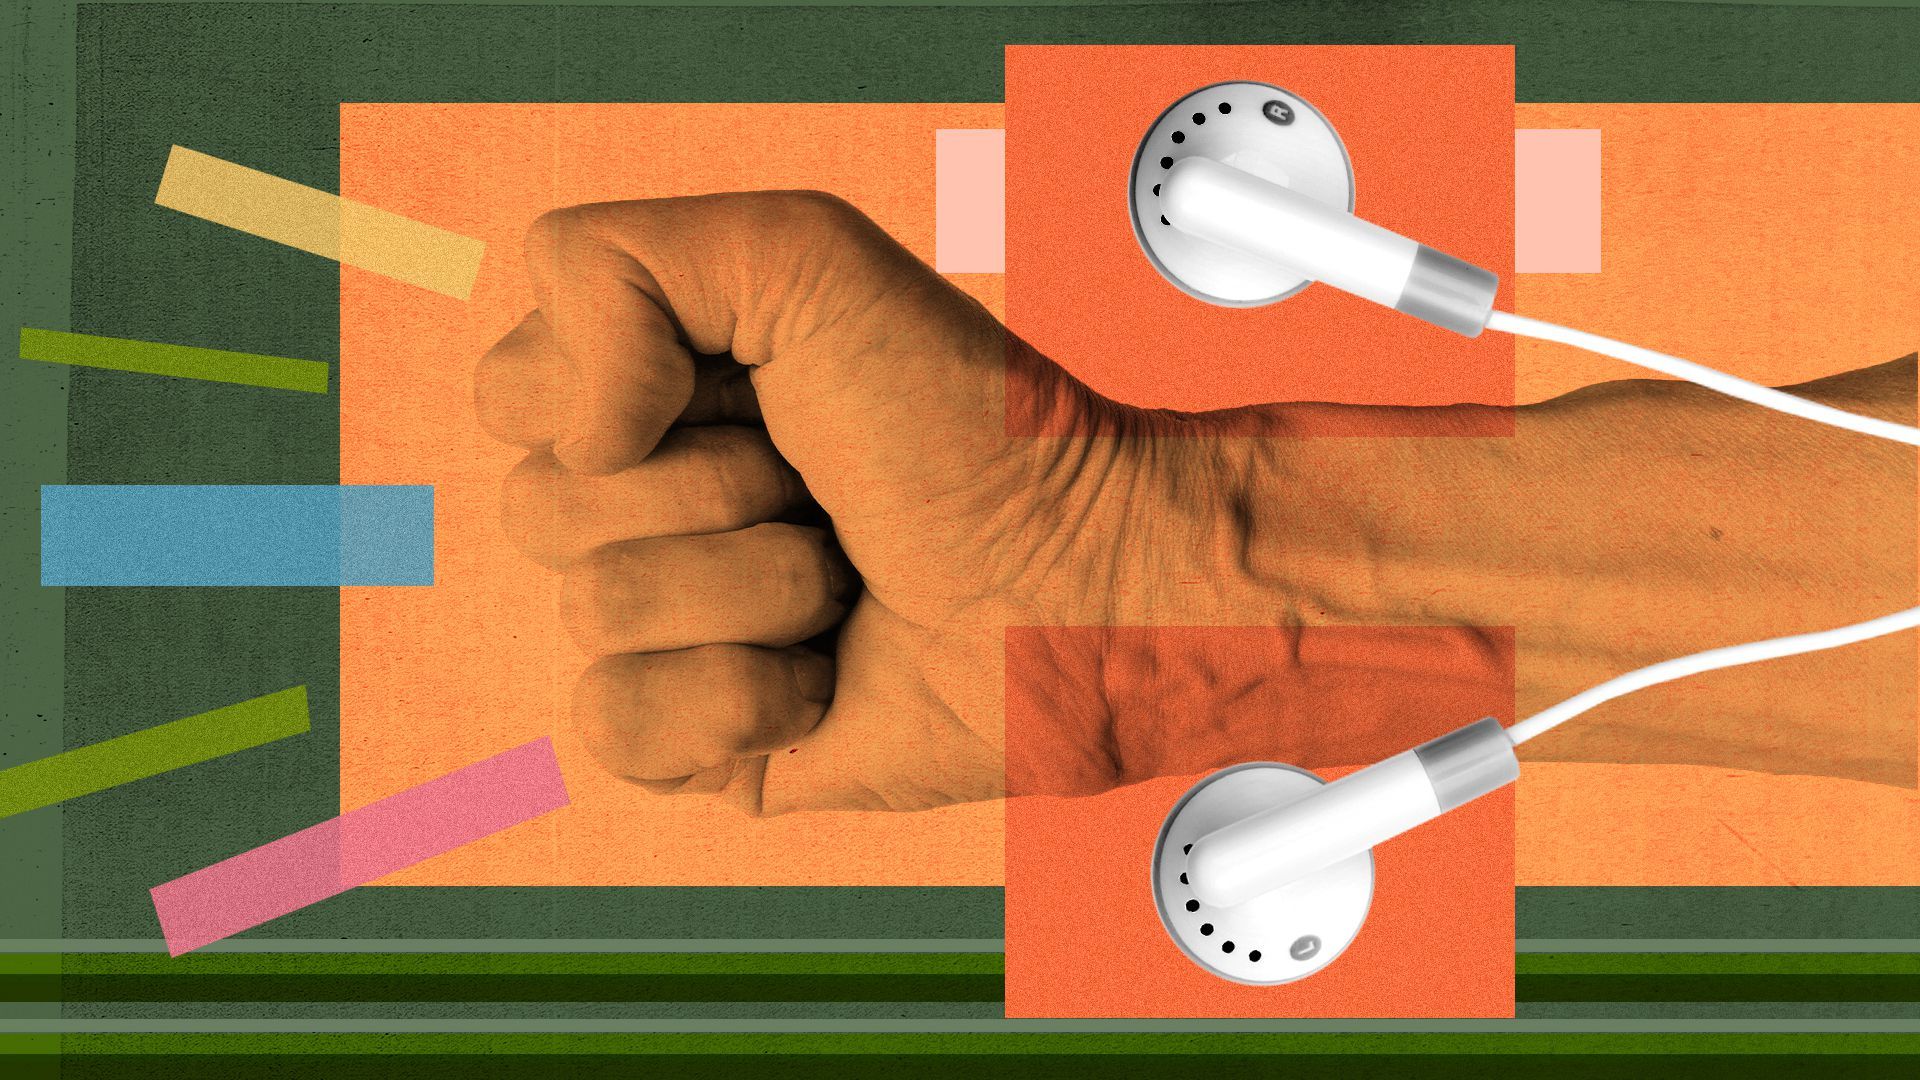 Illustration collage of a punching fist framed by Apple headphones and geometric shapes